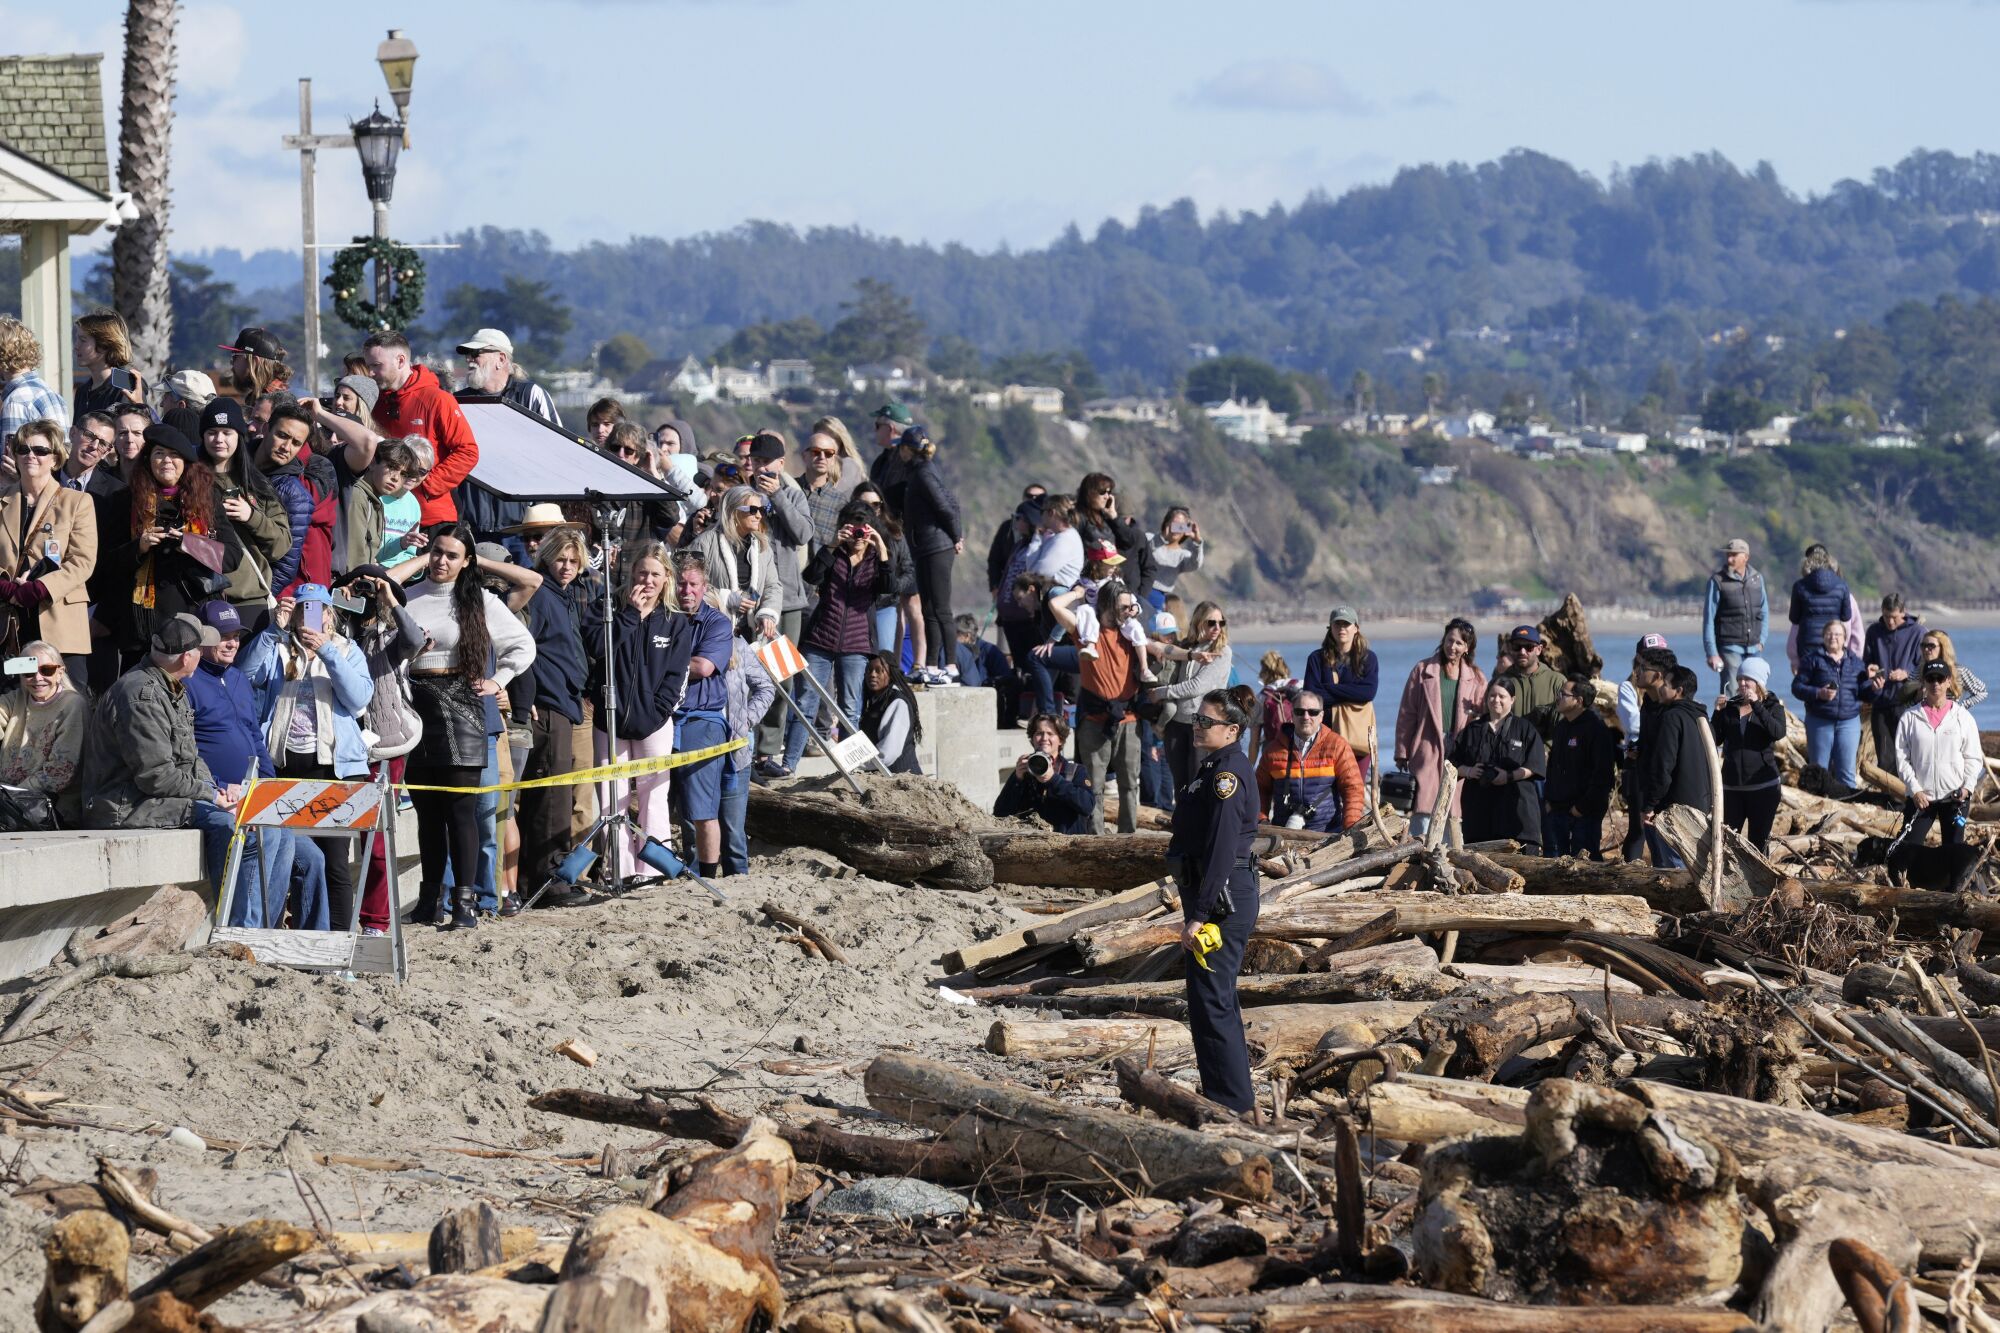 People watch from afar as Biden visits Capitola with business owners and residents